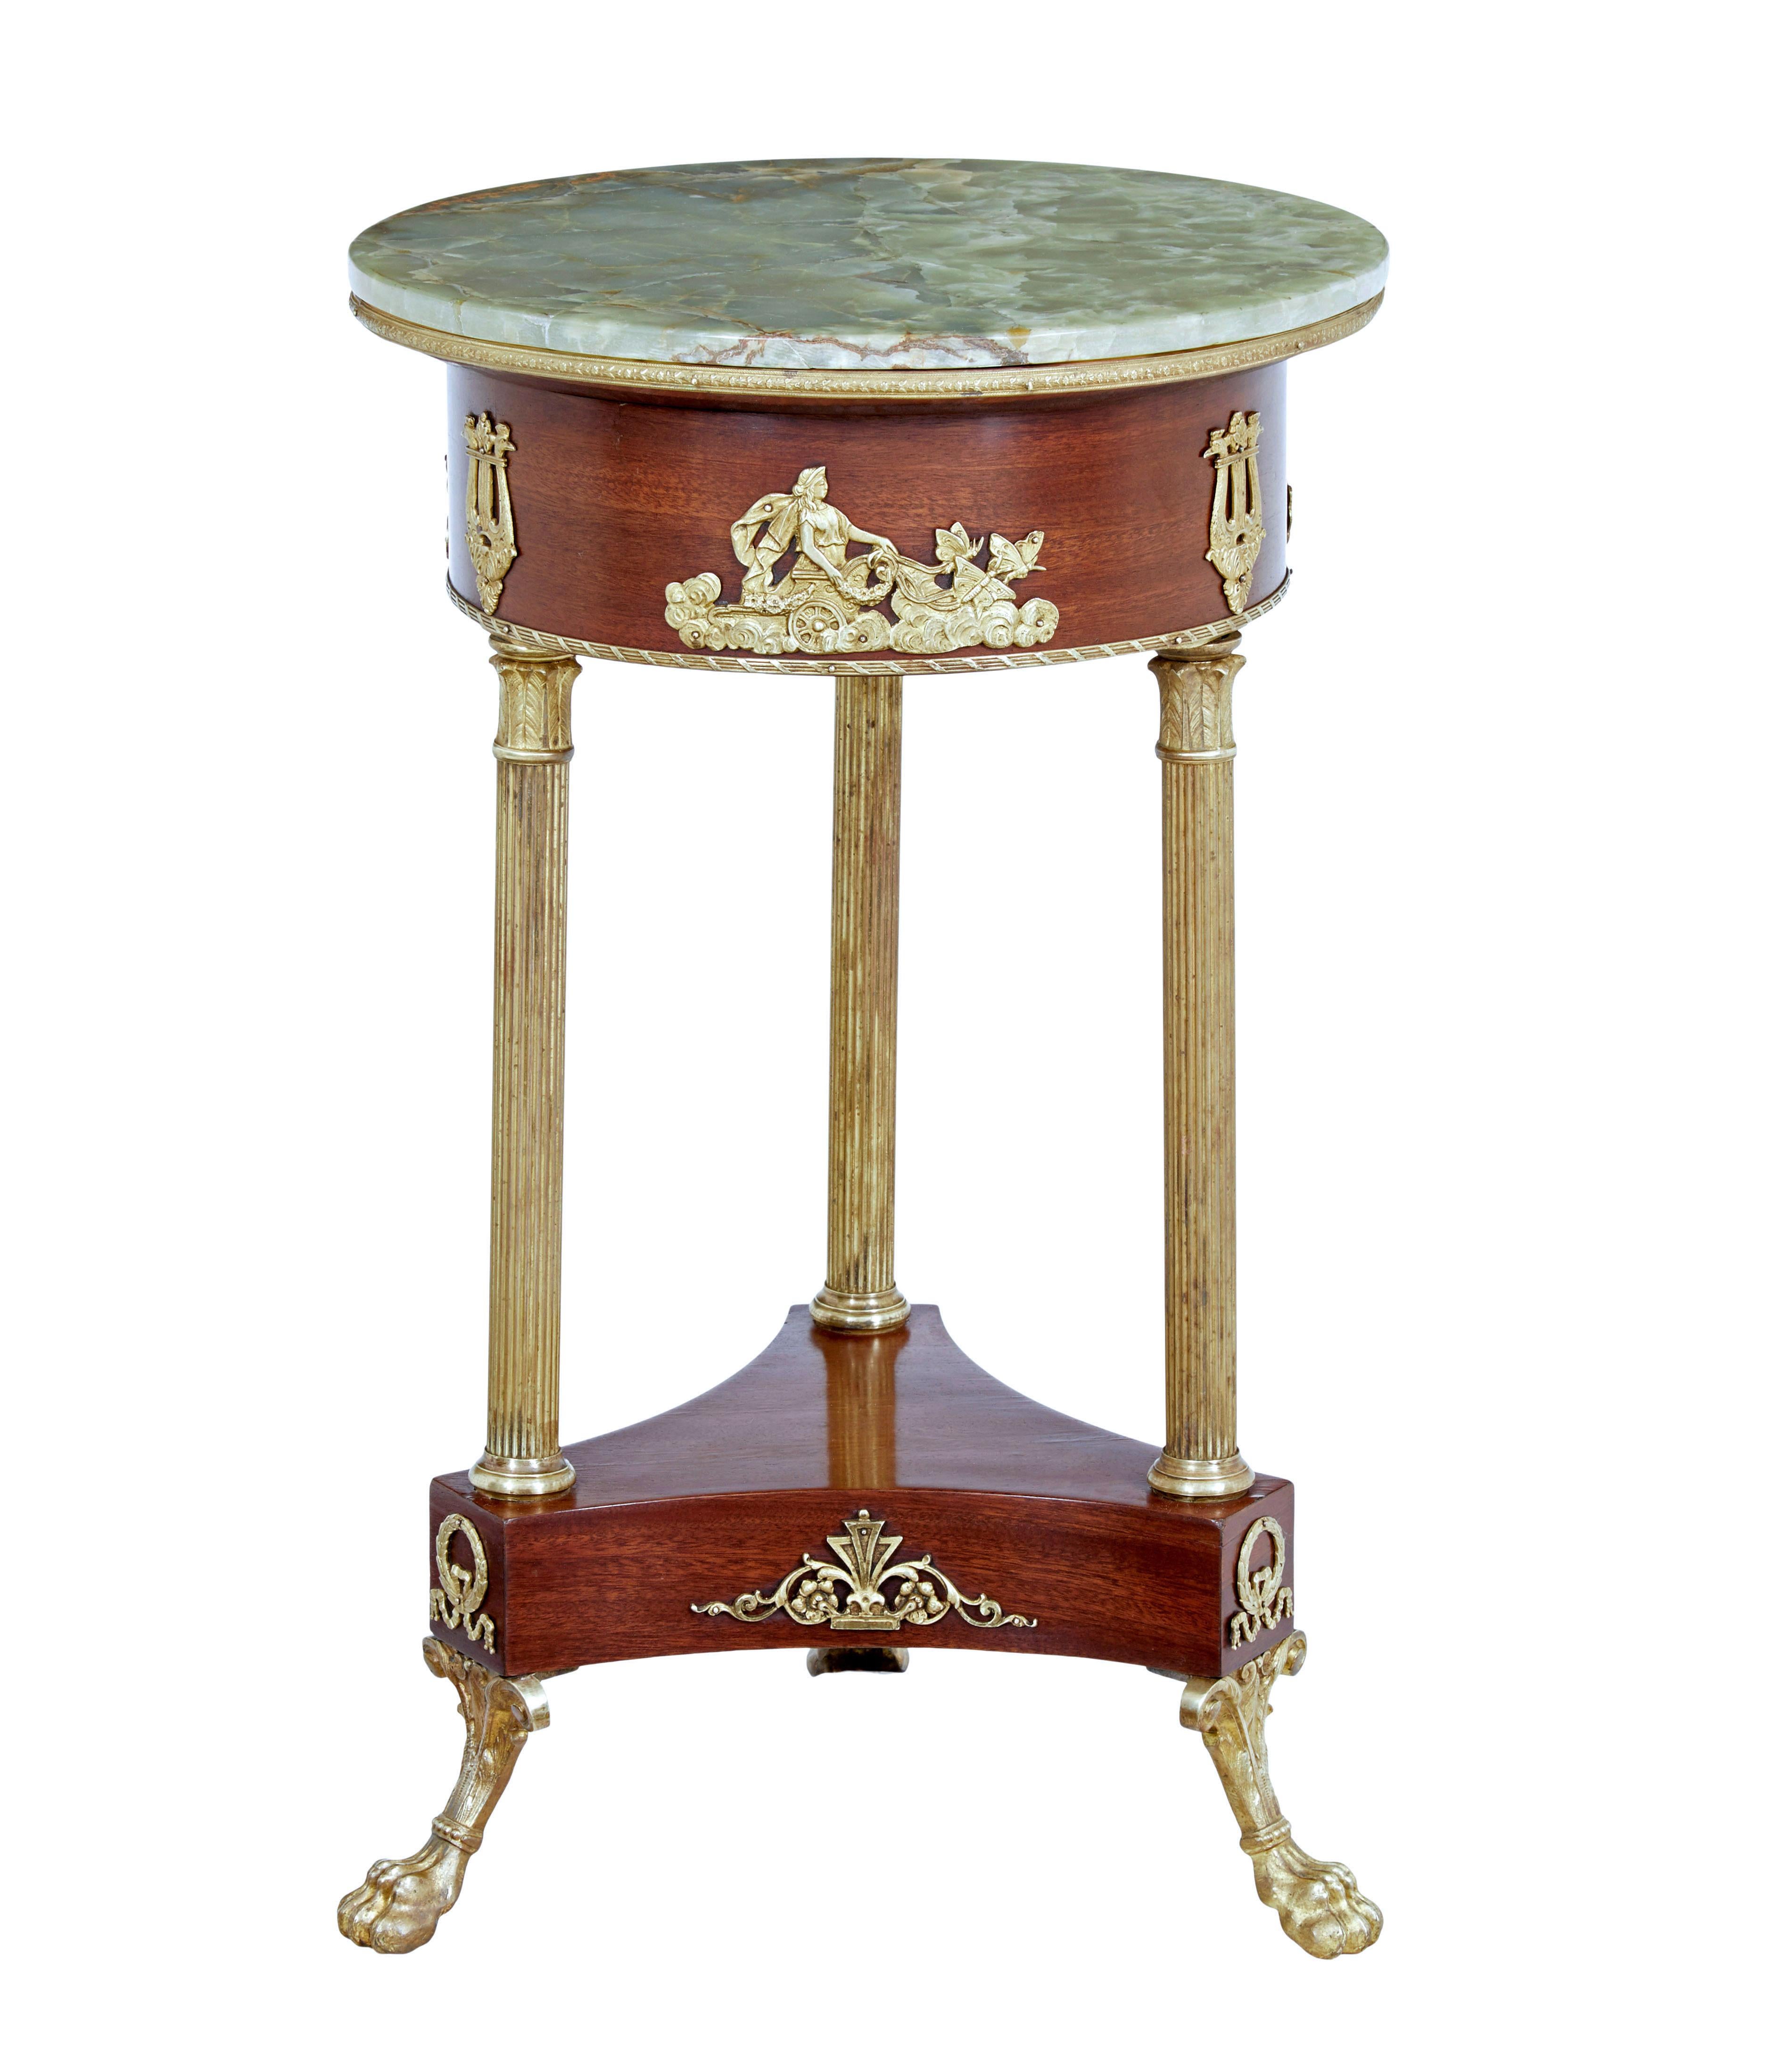 Elegant empire influenced occasional table circa 1910.

Circular green marble top standing on a mahogany support, profusely decorated with ormolu mounts and edging. Top supported by 3 column legs which link down to a shaped mahogany base with